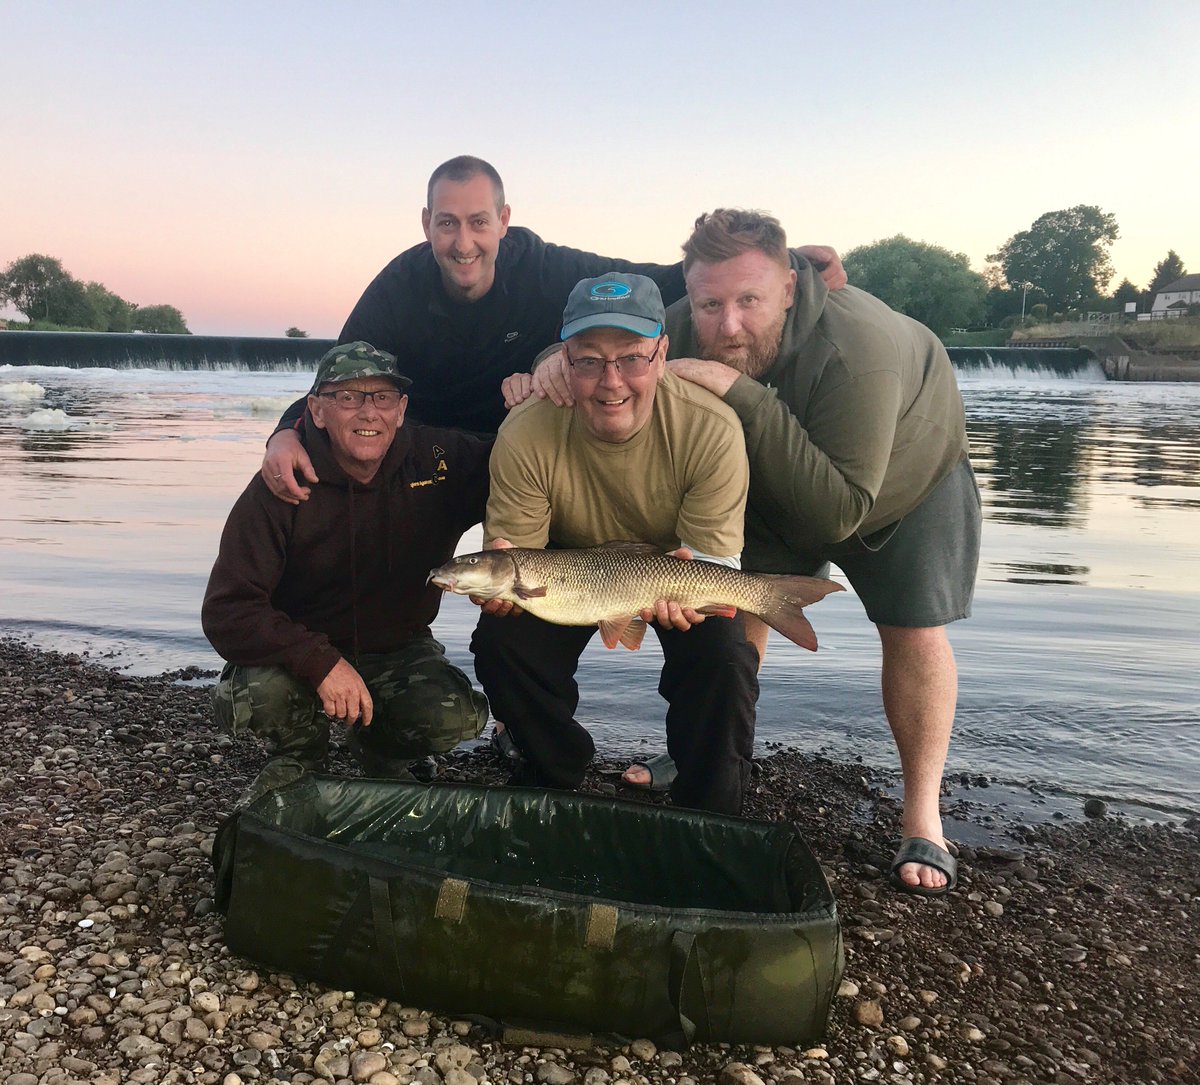 If you have knowledge to share on England’s #rivers and #fisheries - please take part in the public consultation on the future of the close season for coarse #fishing on rivers. It runs til 11 March 2019. Find out more at bit.ly/2ALuO0R #getfishing